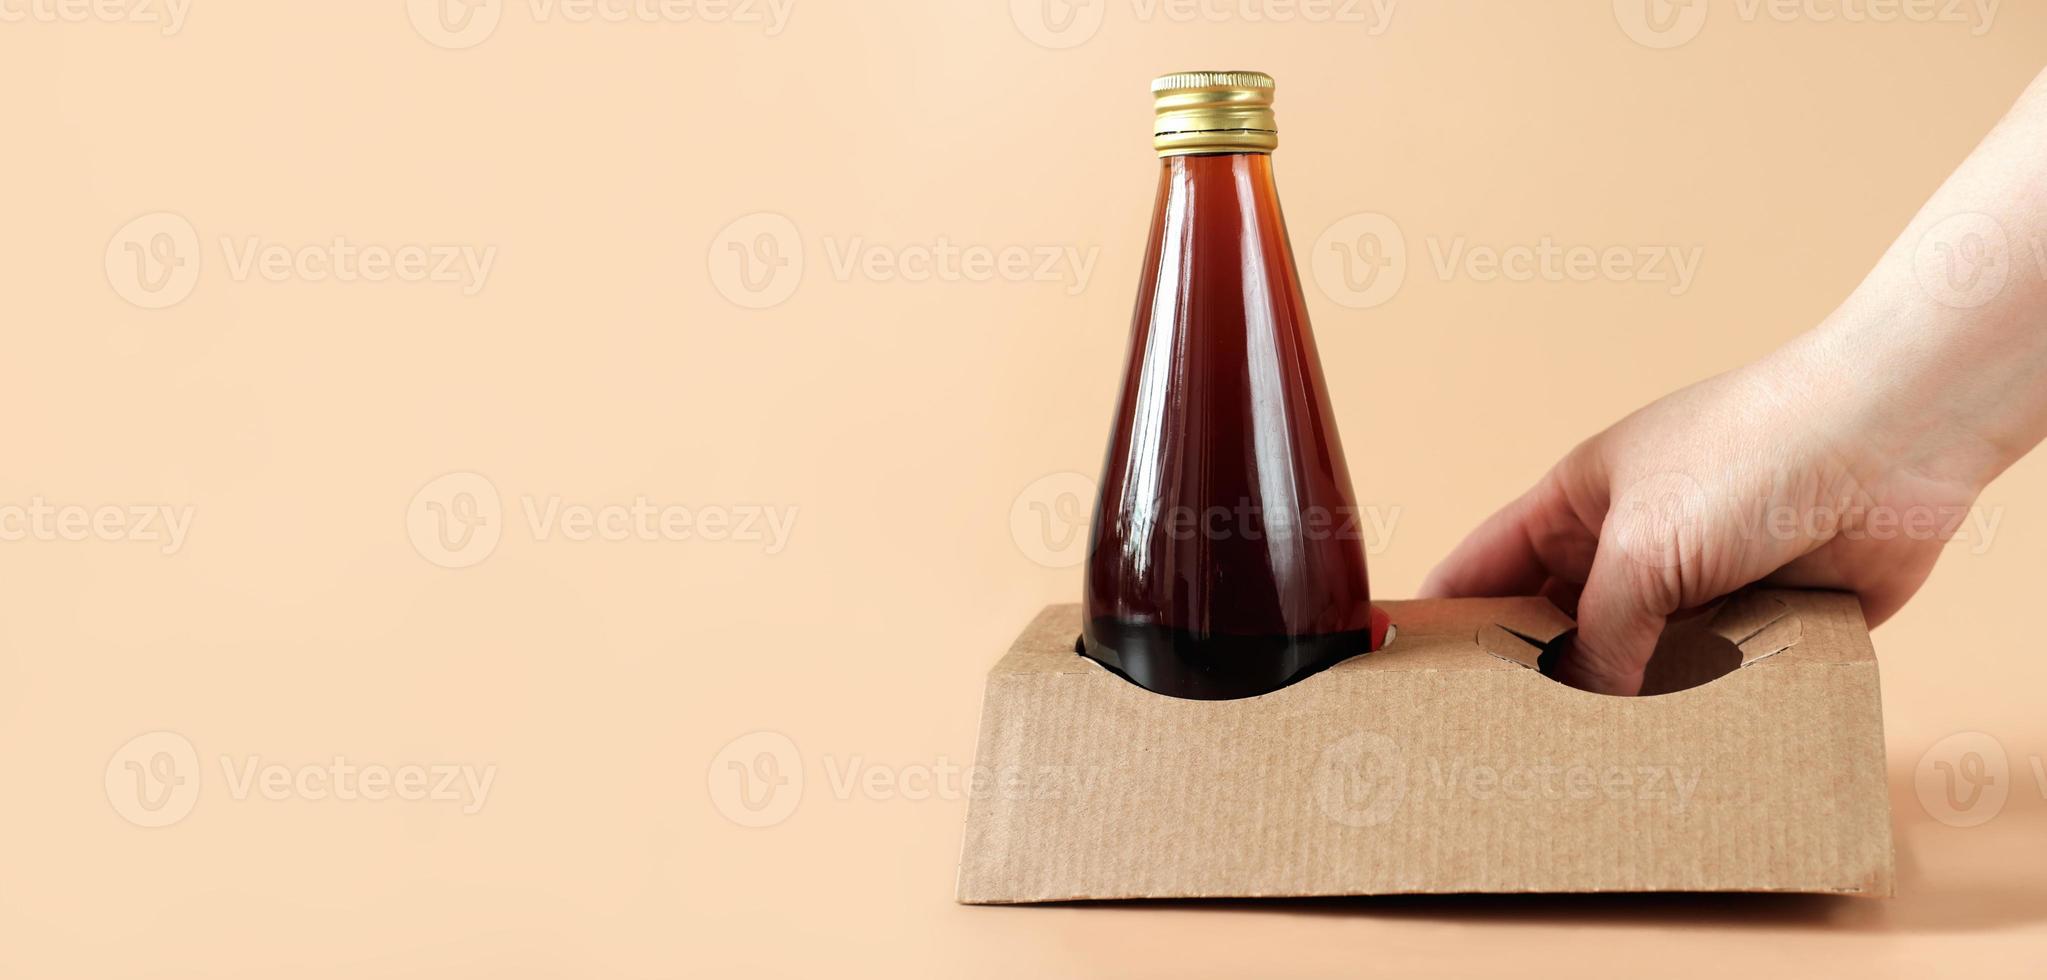 cold brew coffee in glass bottle. Coffee to go concept. hand holding carton or paper biodegradable holder, eco packaging for everyday drinks, banner photo